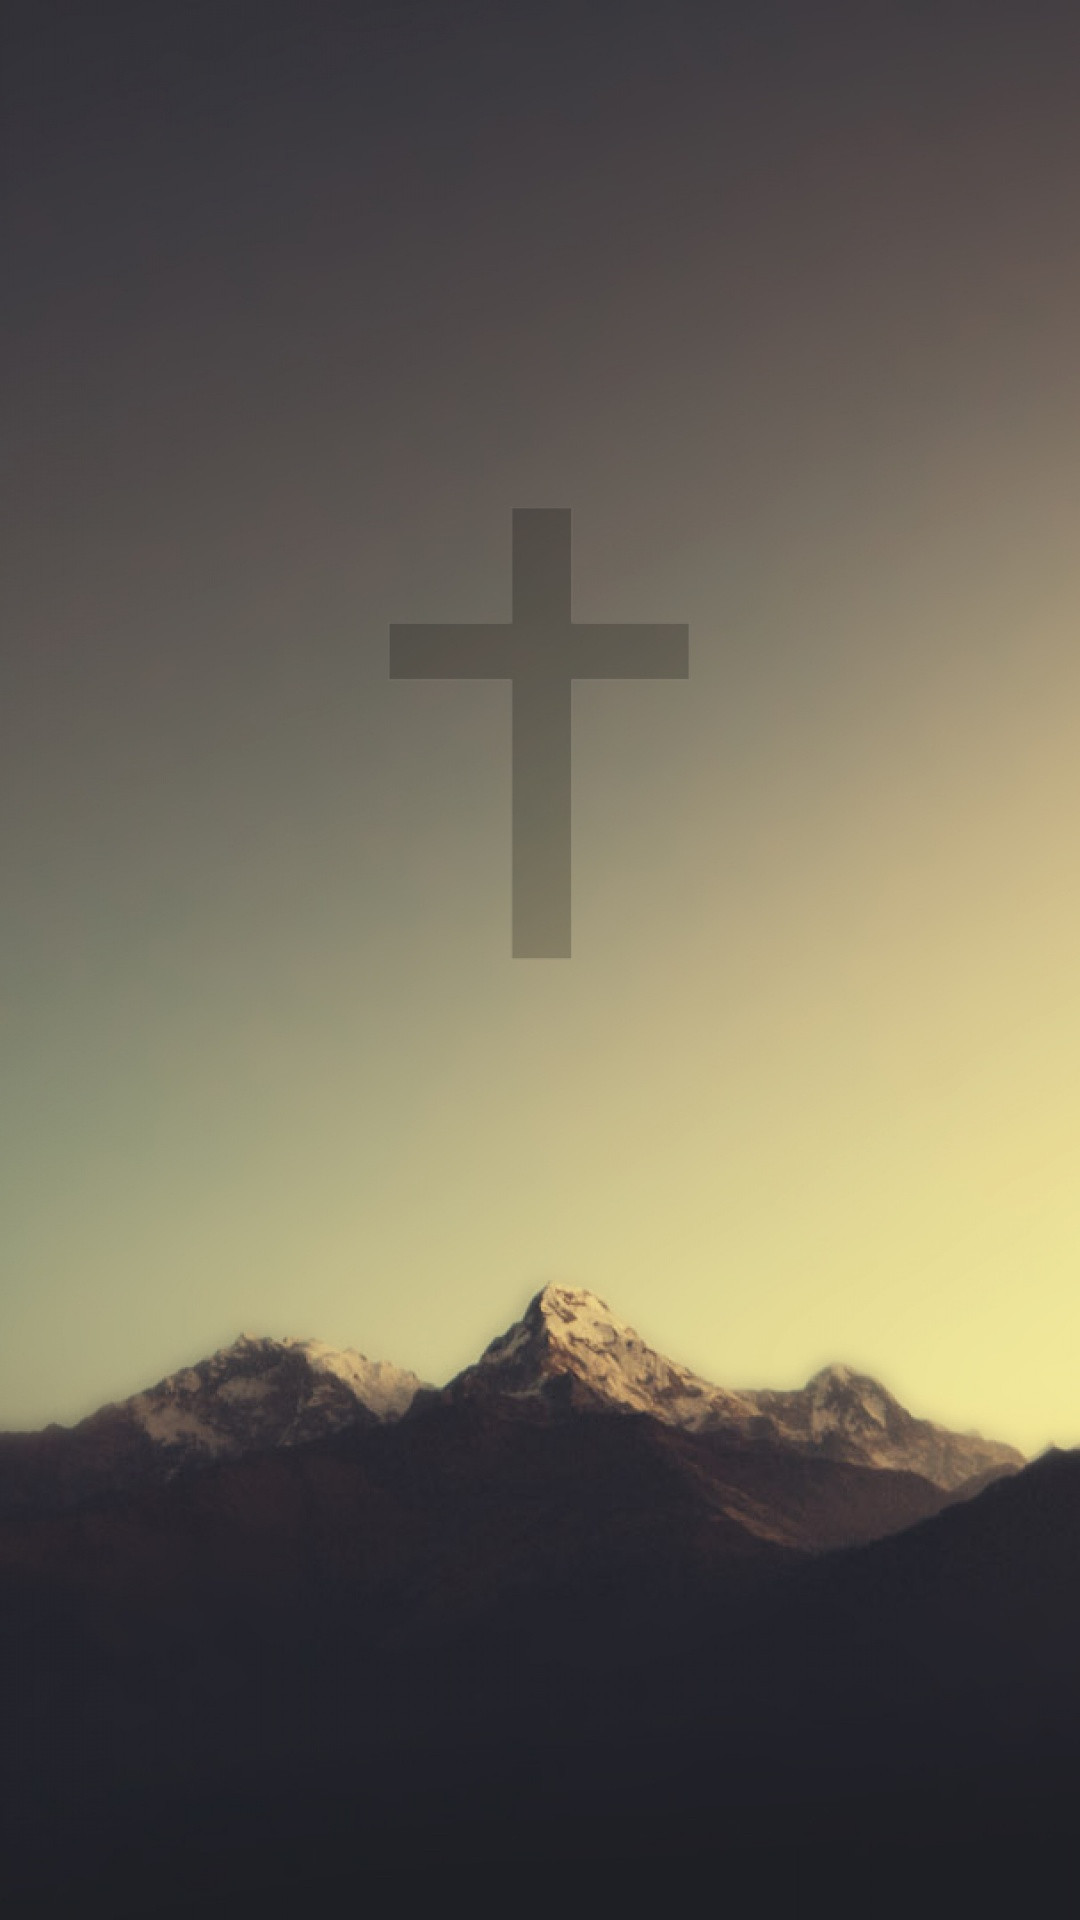 1080x1920 Christian Cell Phone Wallpaper Awesome Christian iPhone Wallpaper Hd